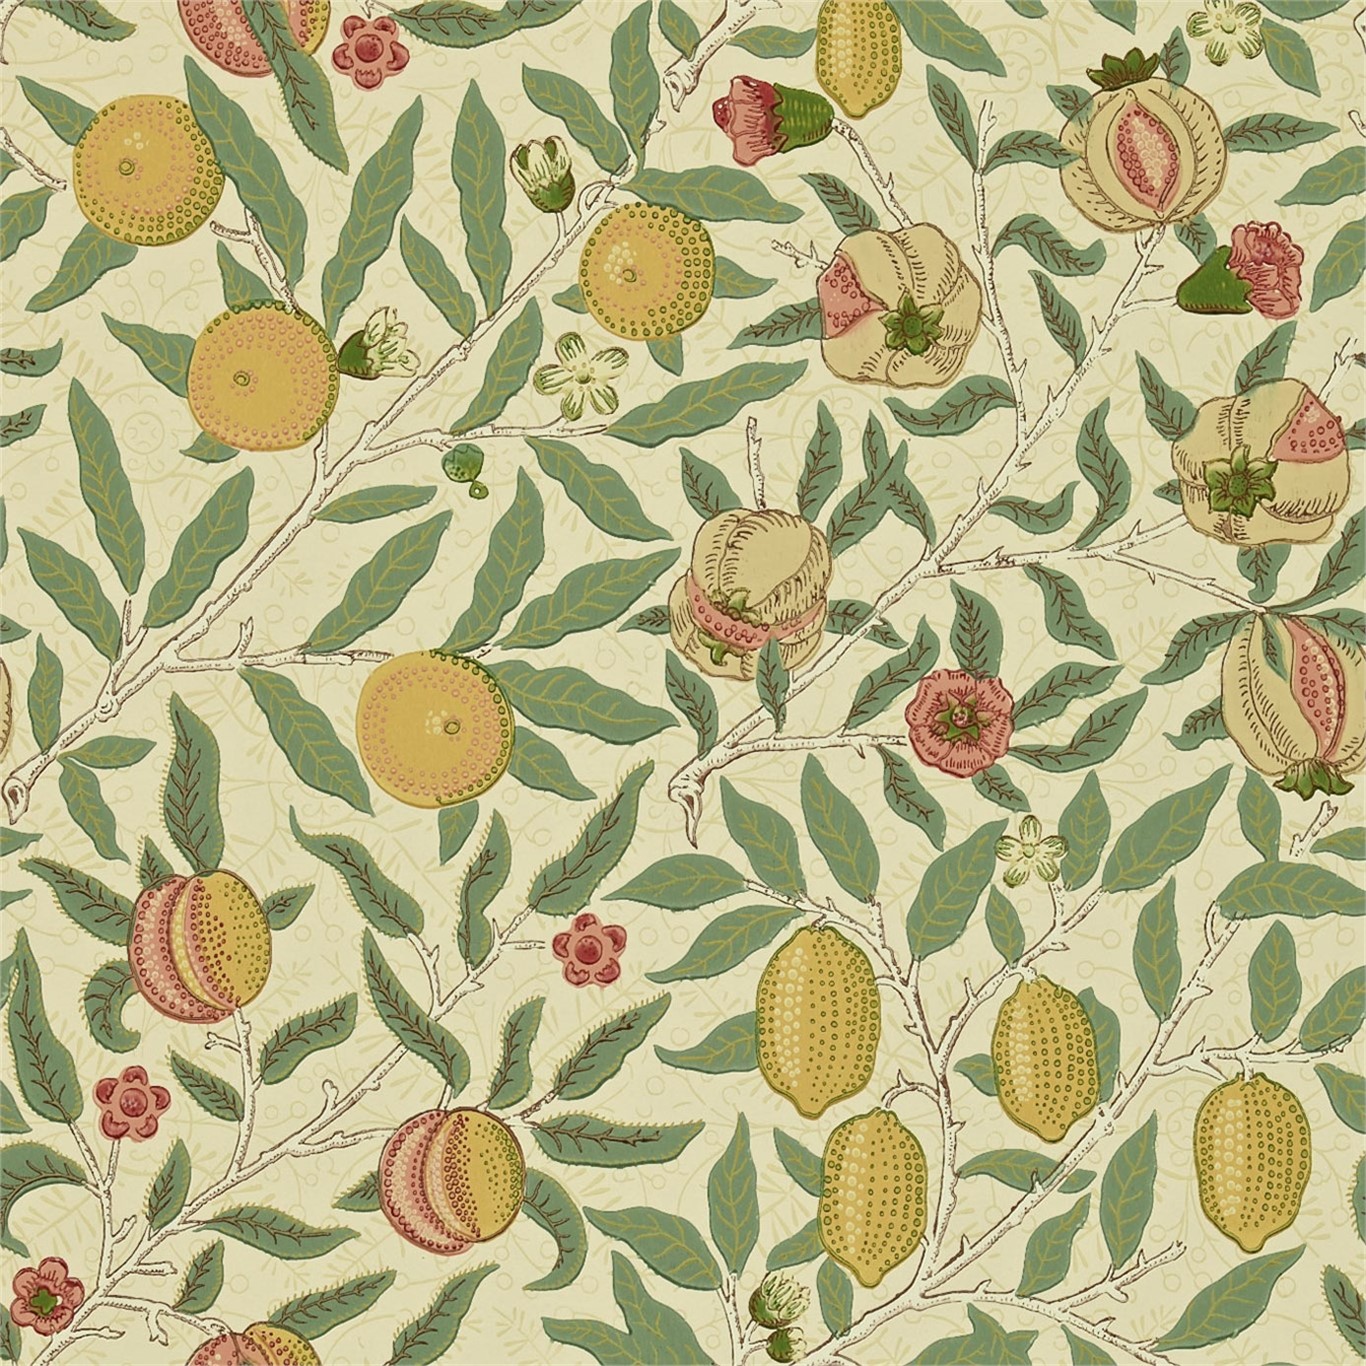 Fruit, A Wallpaper By Morris & Co - William Morris Style Library - HD Wallpaper 